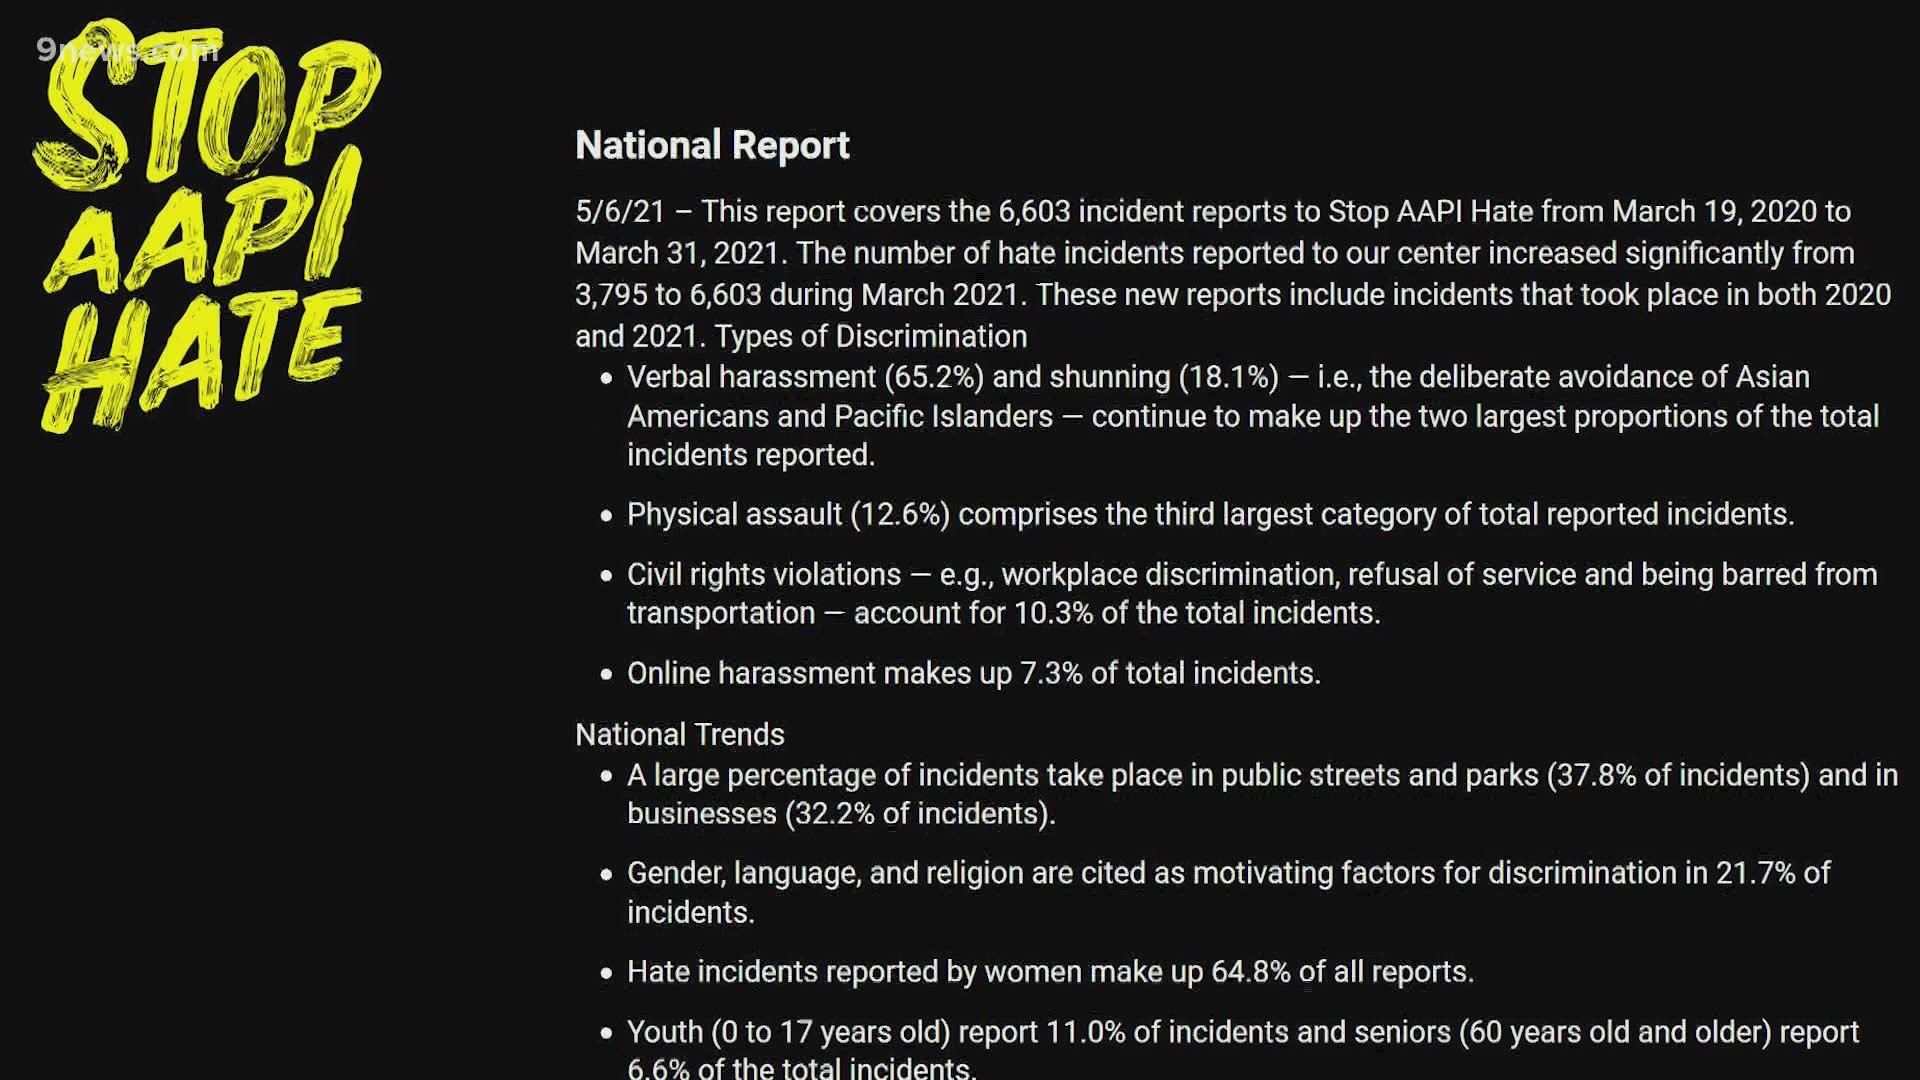 A look at the trends of attacks on the AAPI community following the COVID-19 community.